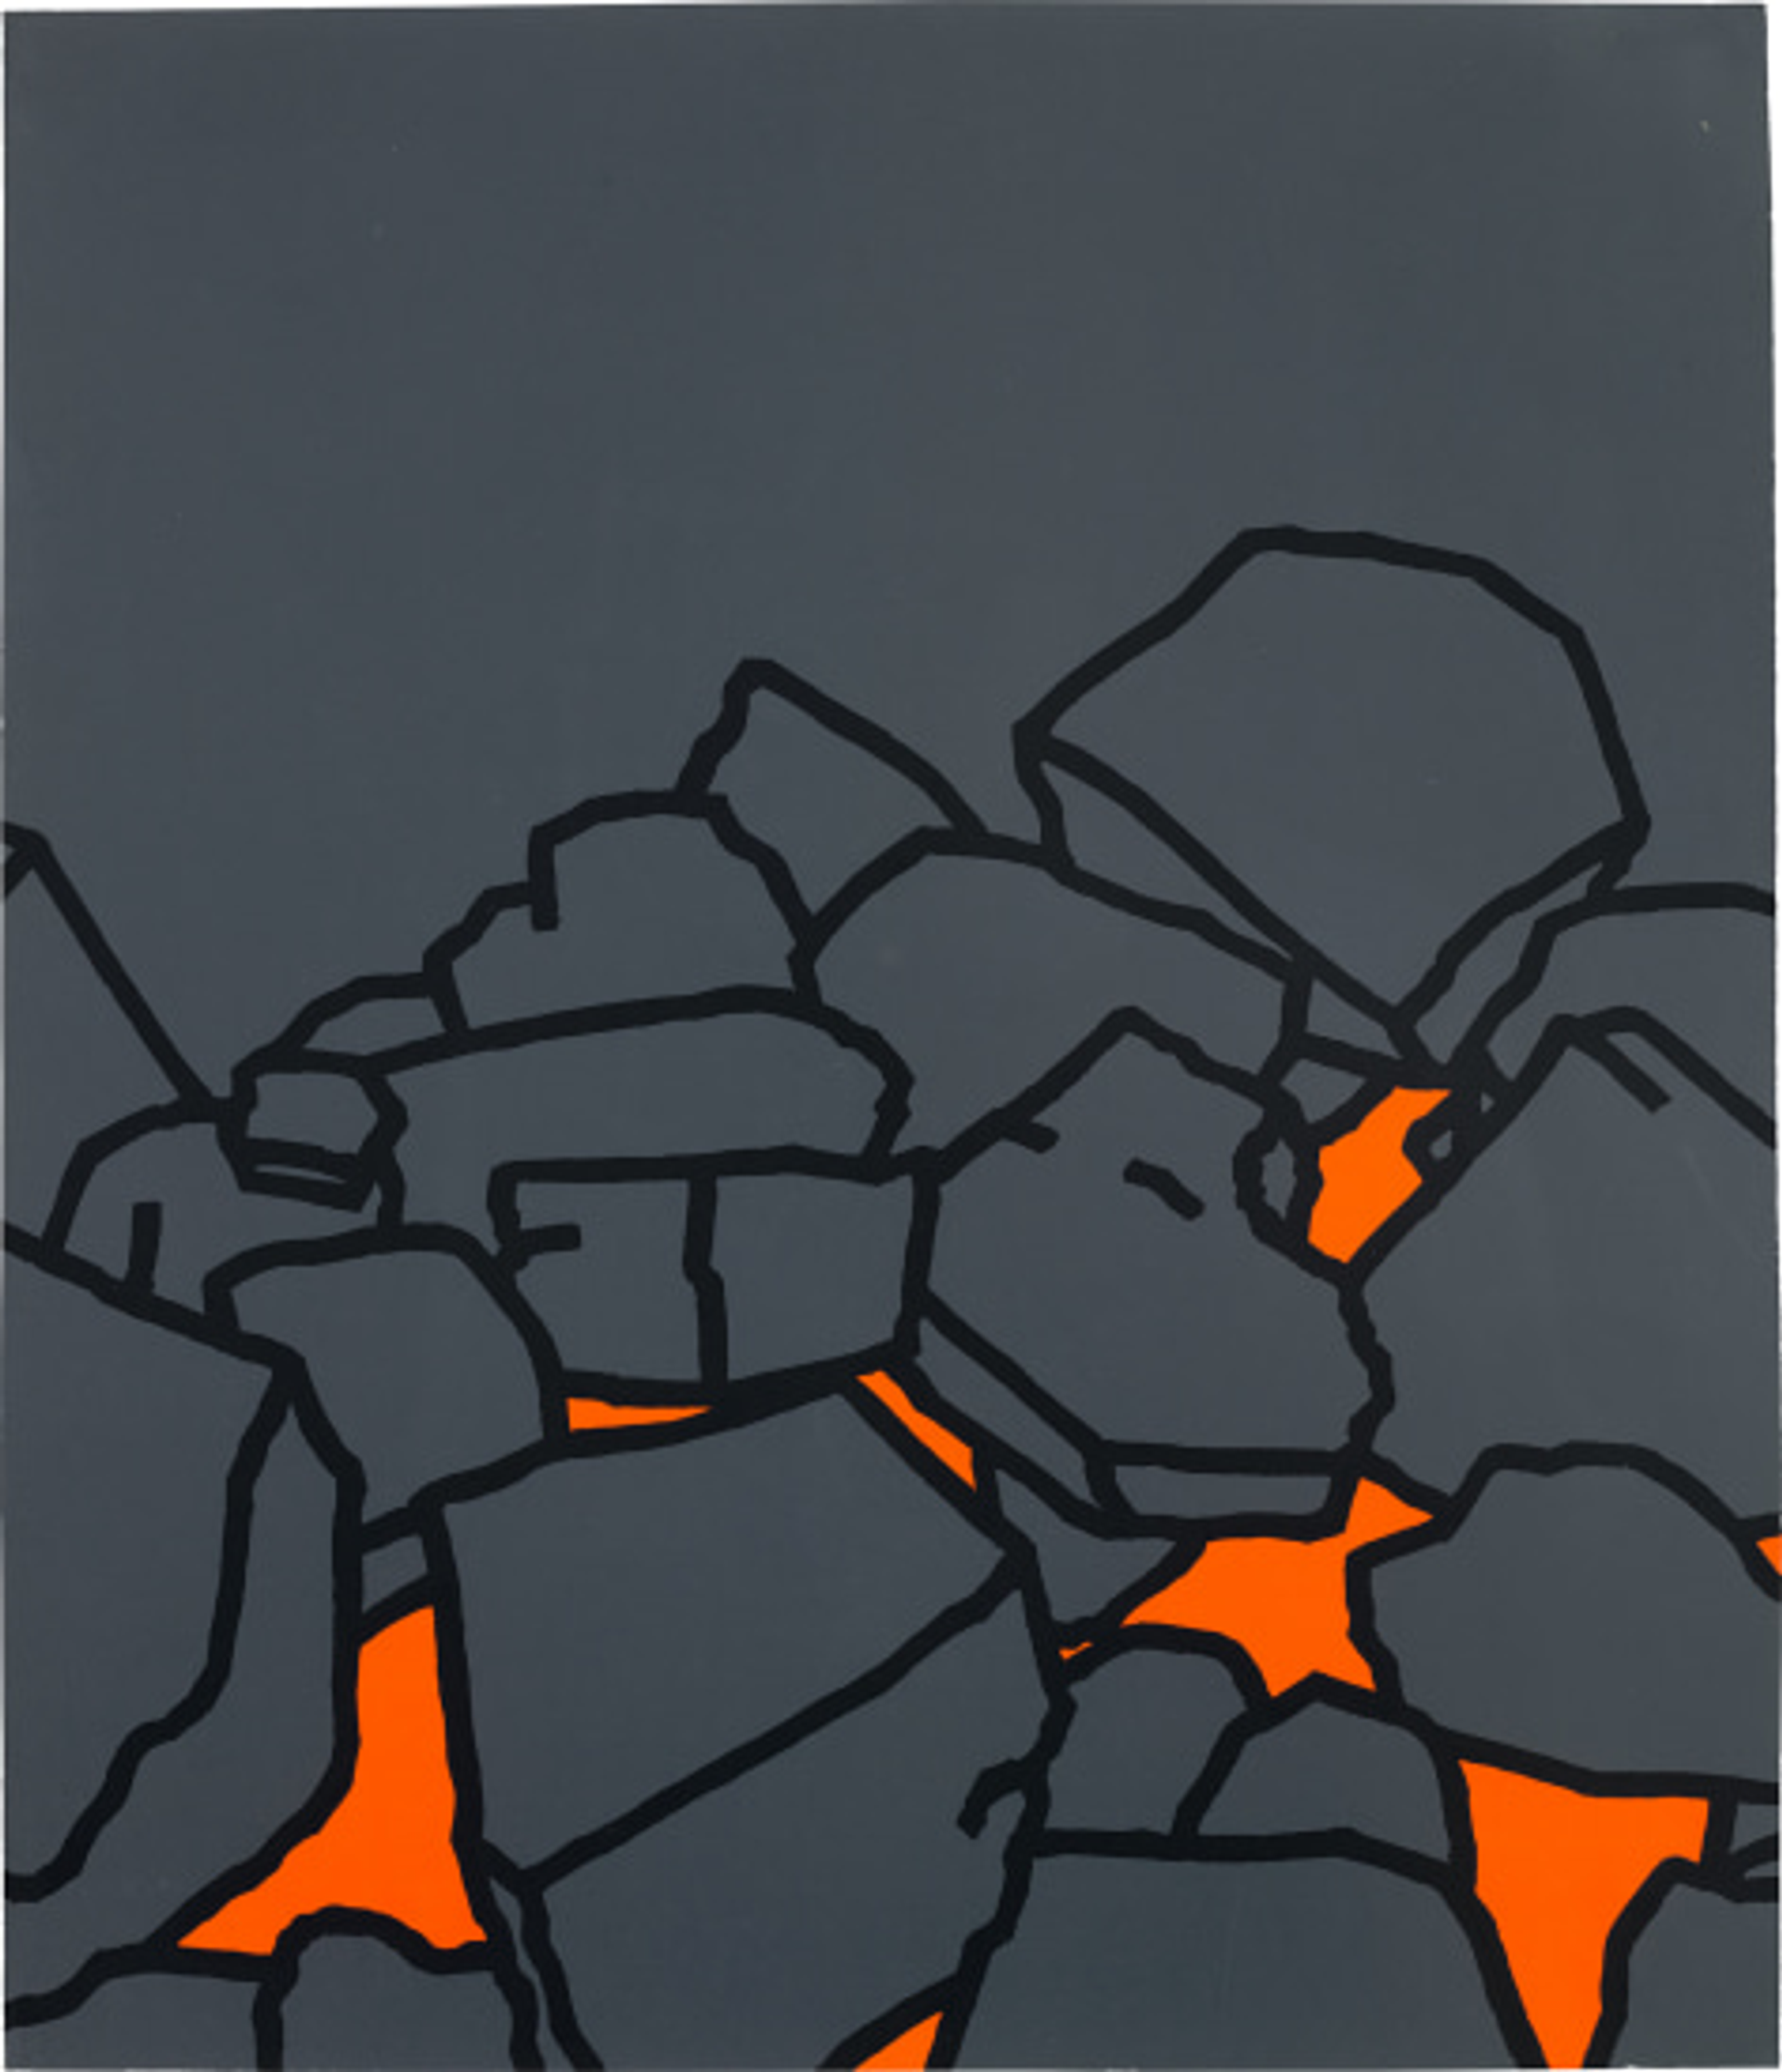 Closeup cropped image of stylised black coal pieces outlined with black lines on a black background, with vibrant orange hues symbolising fire emerging.